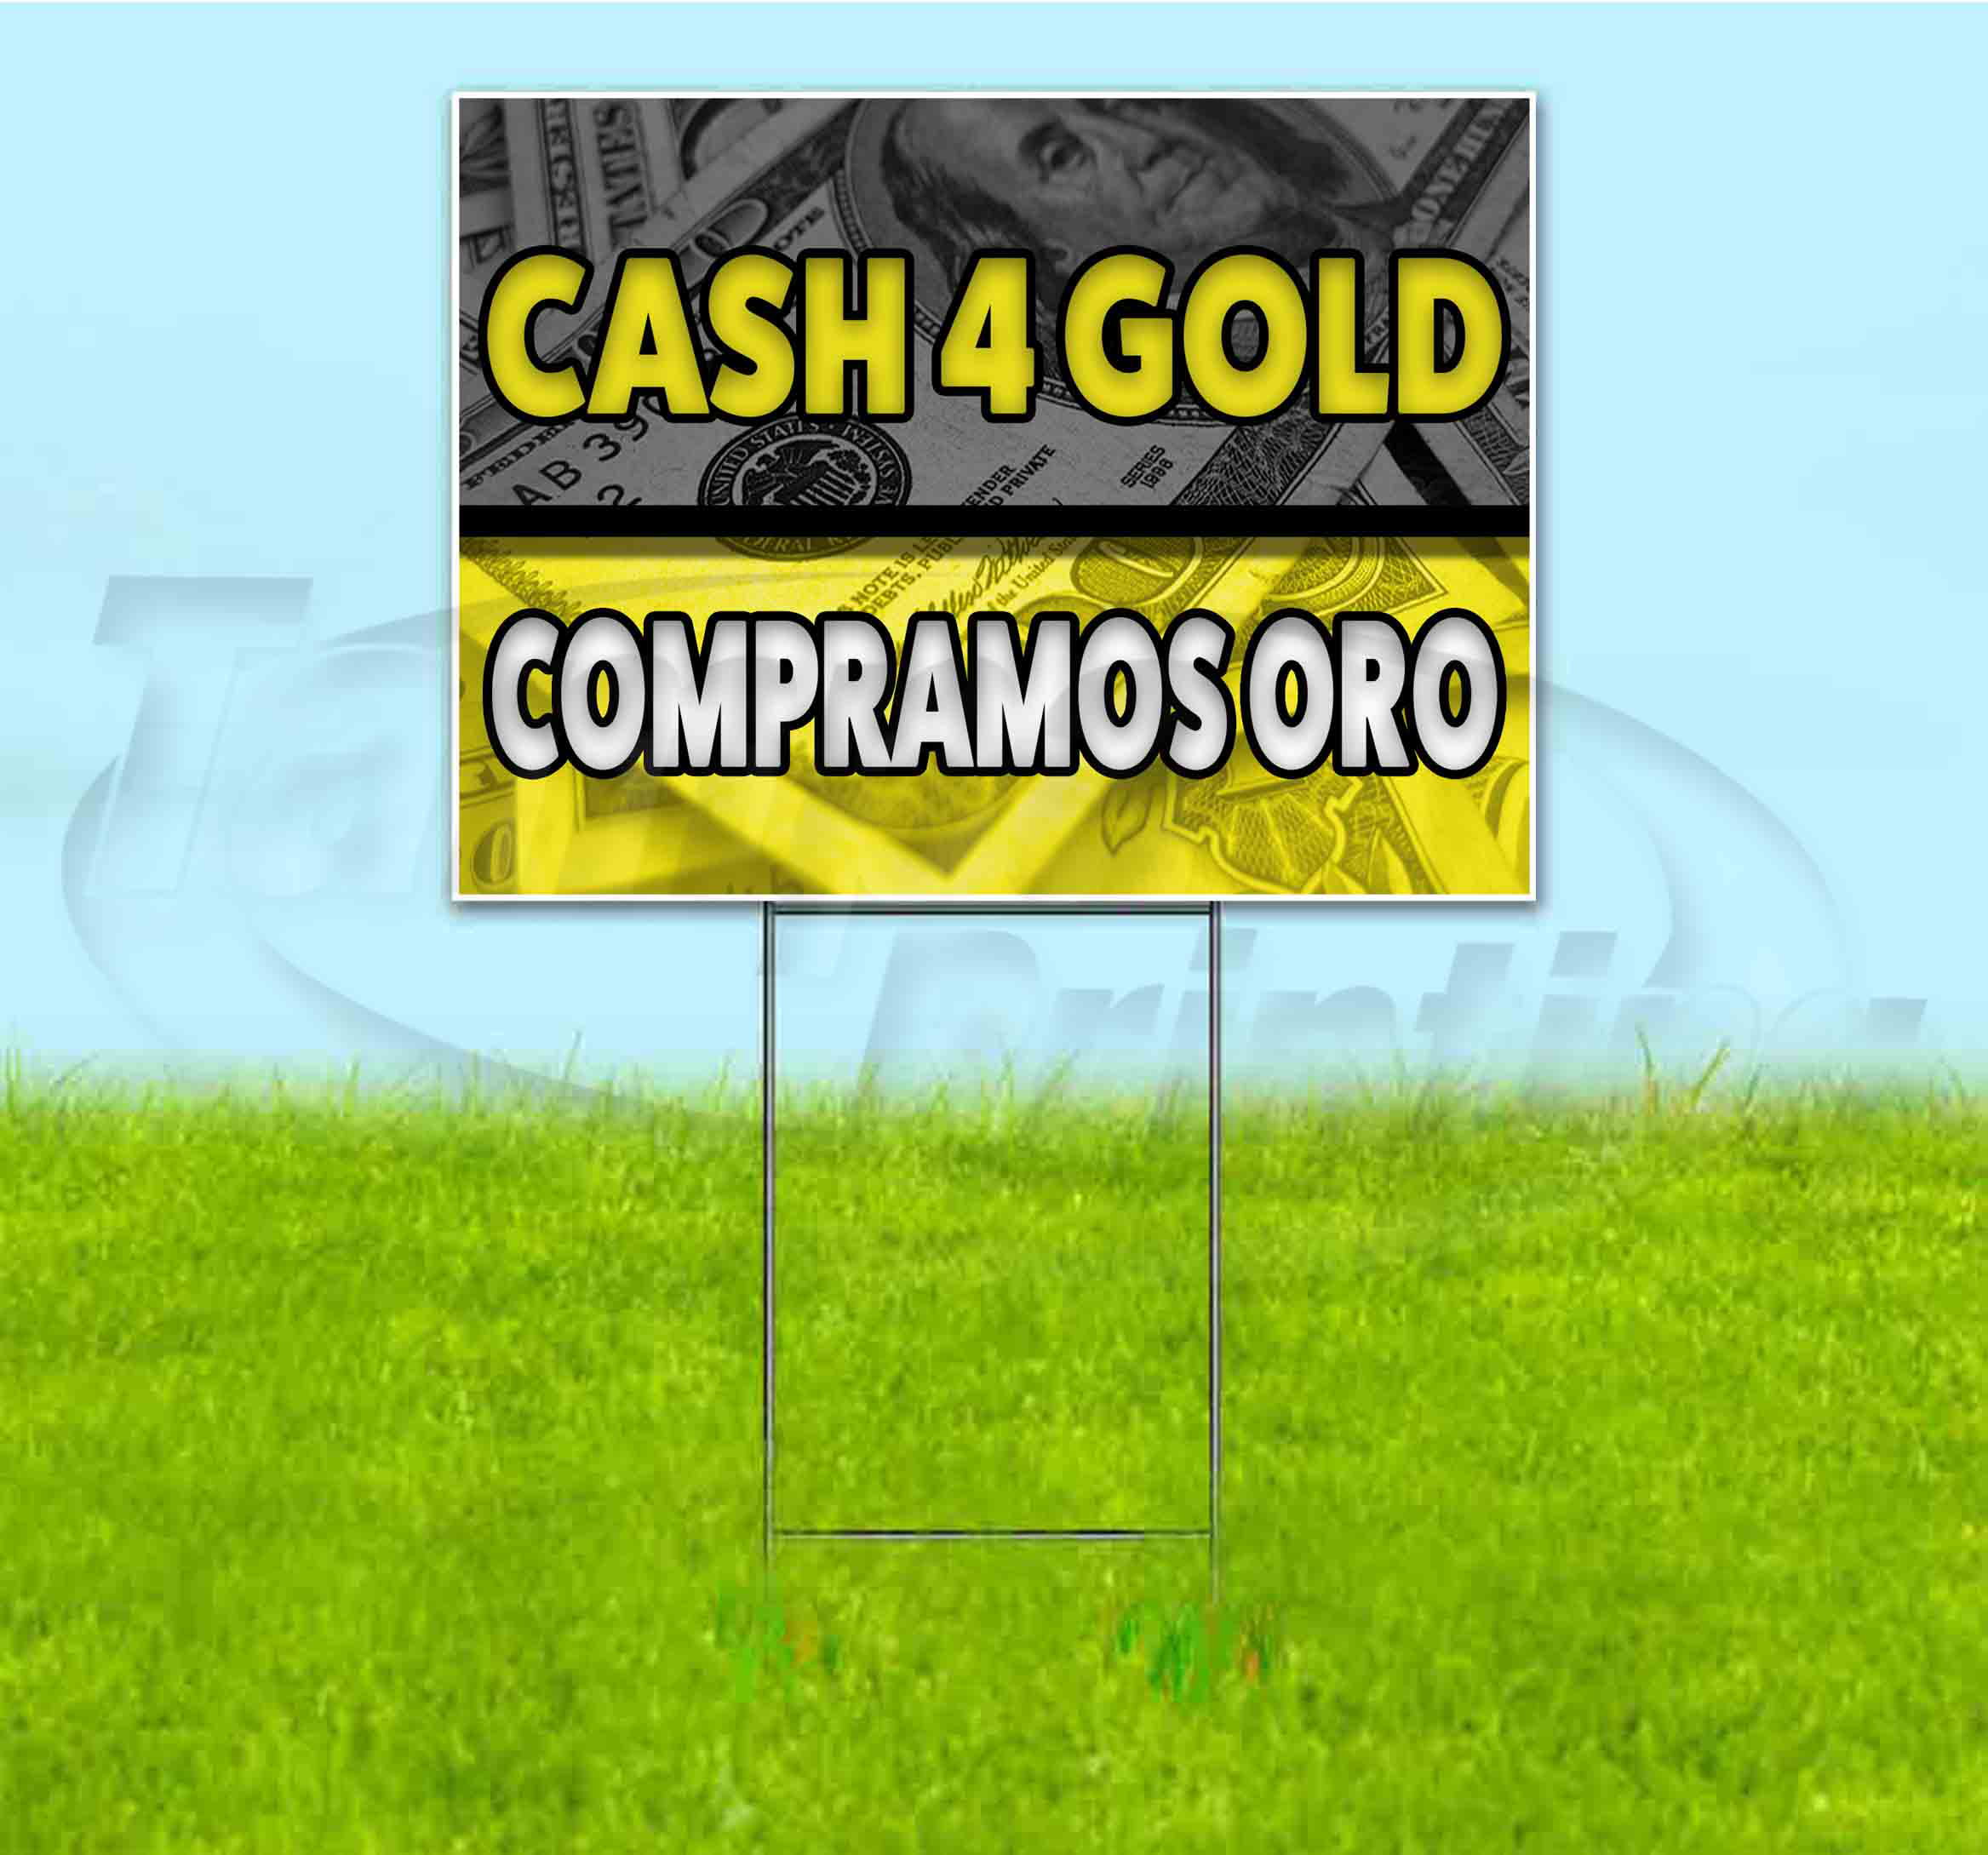 CASH 4 GOLD COMPRAMOS ORO Advertising Vinyl Banner Flag Sign Many Size Available 